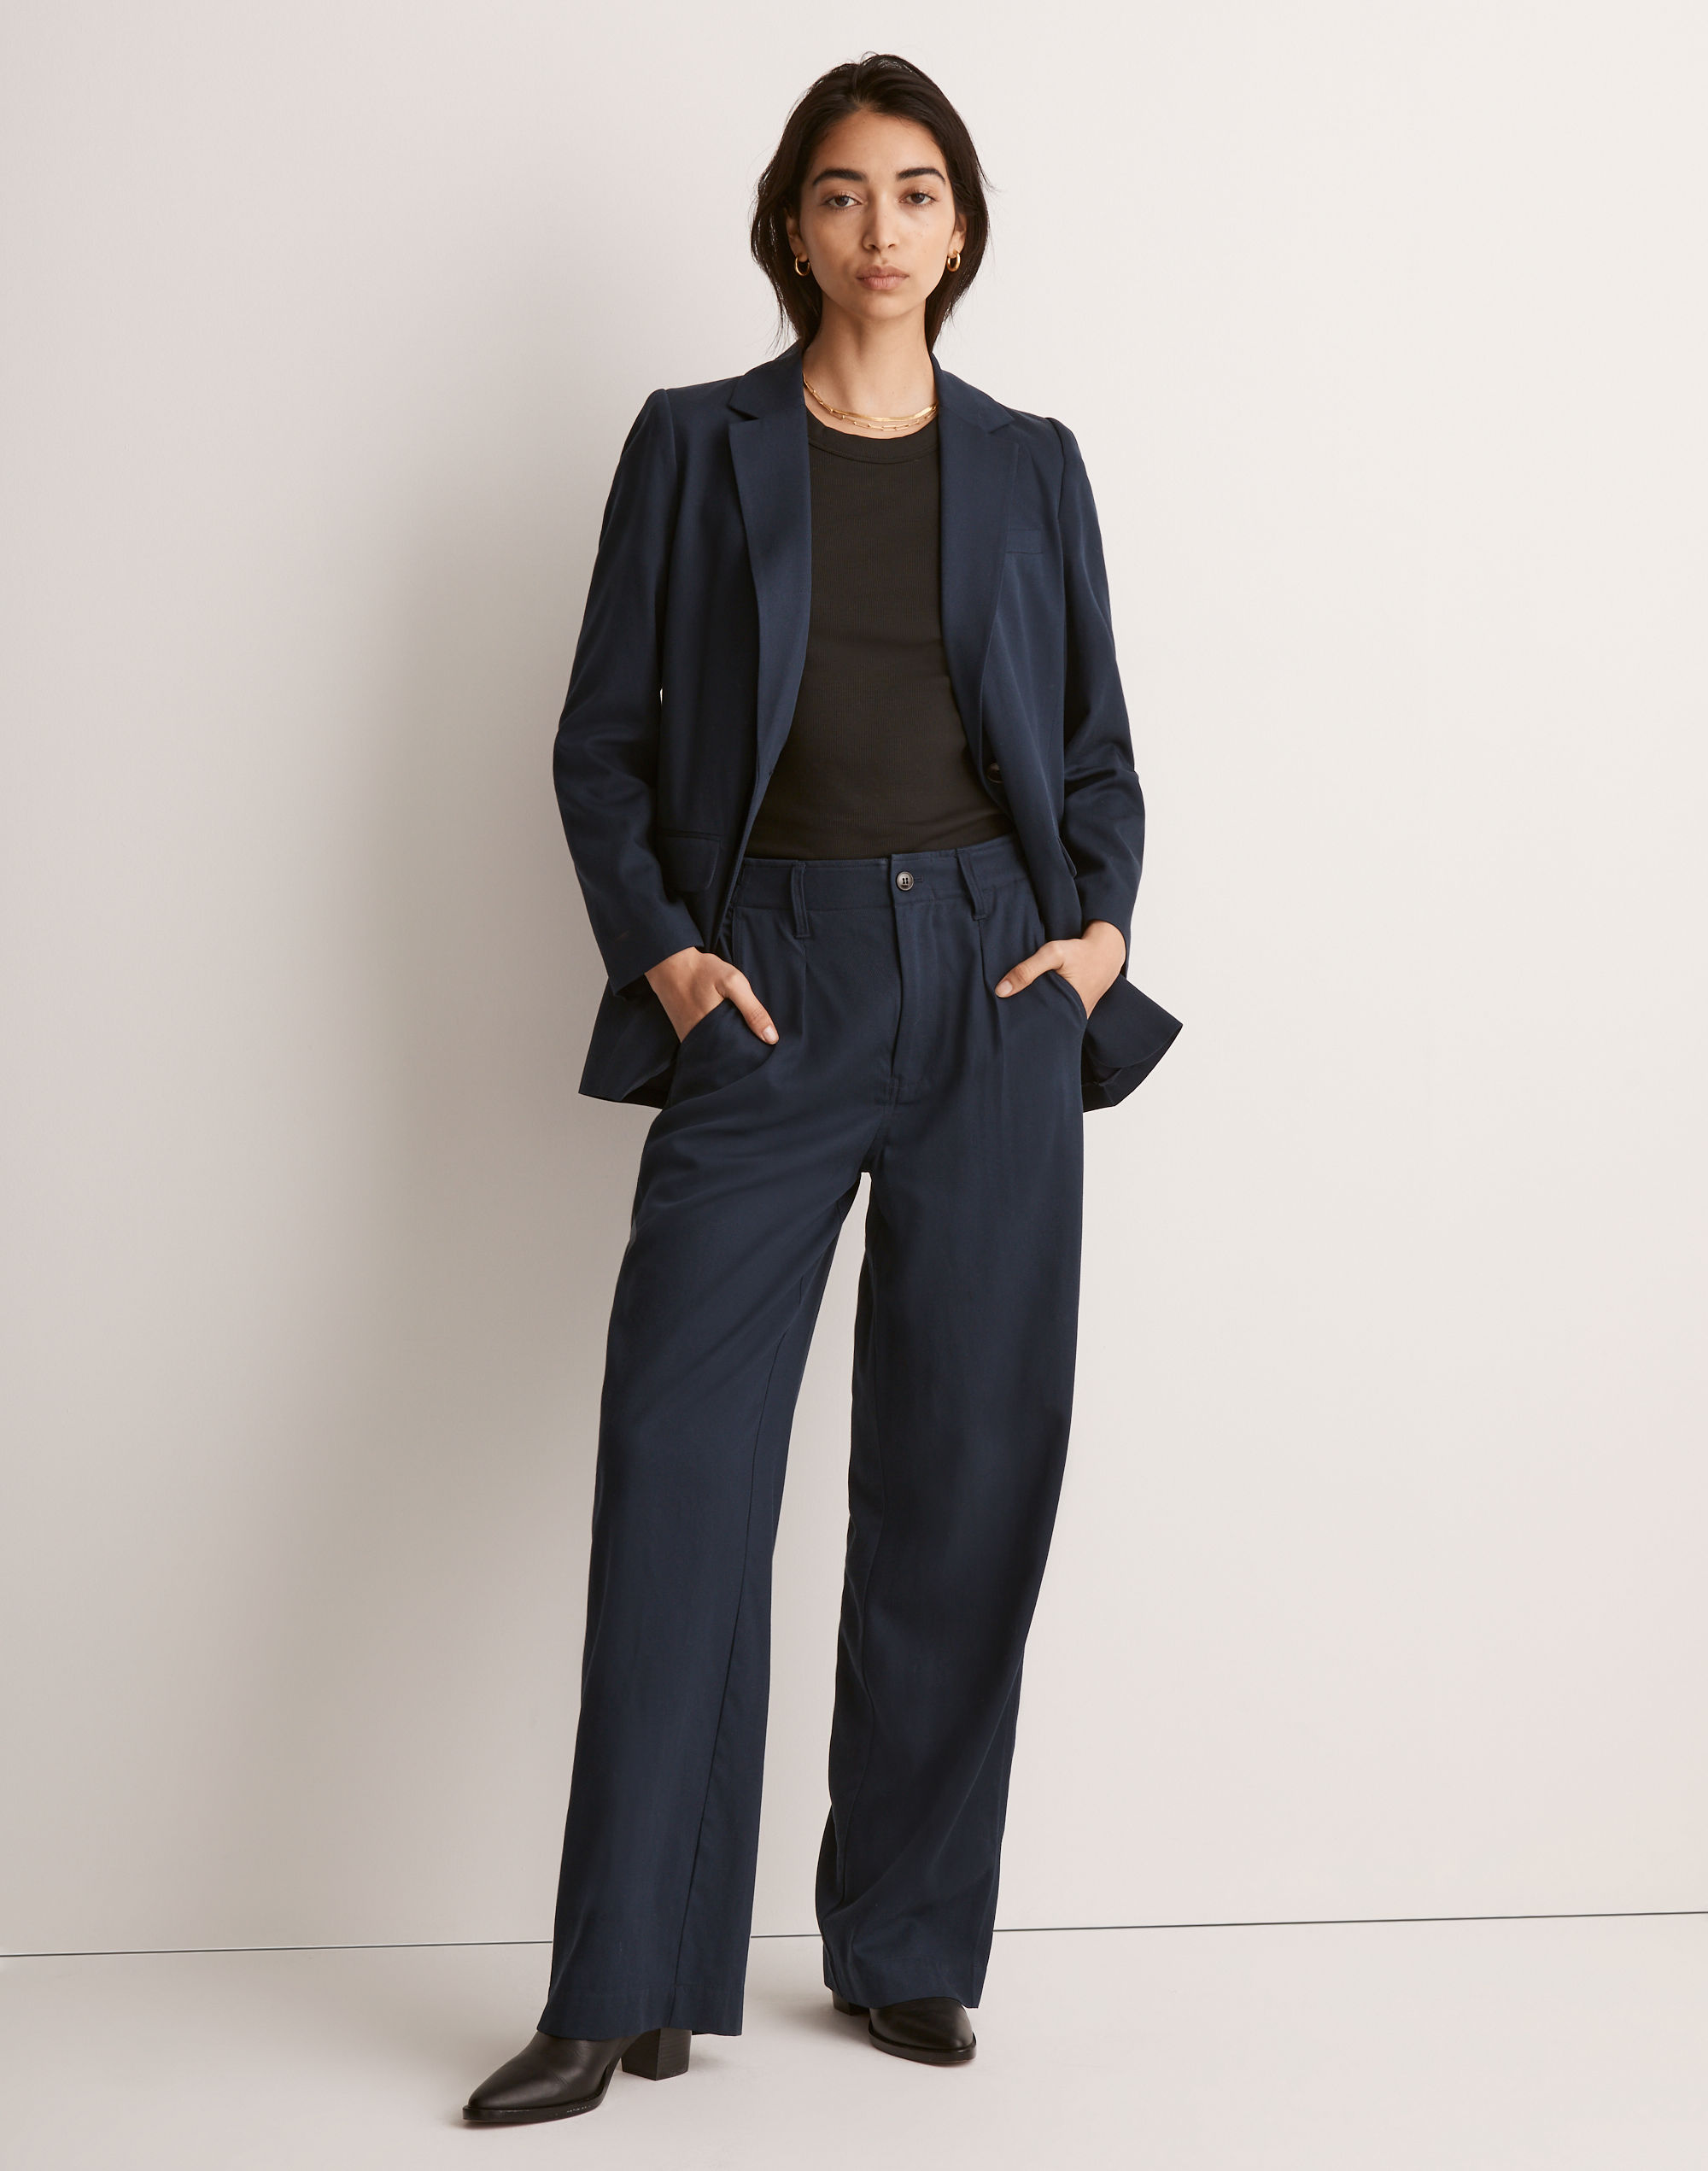 The Tall Neale Straight-Leg Pant in Drapeweave